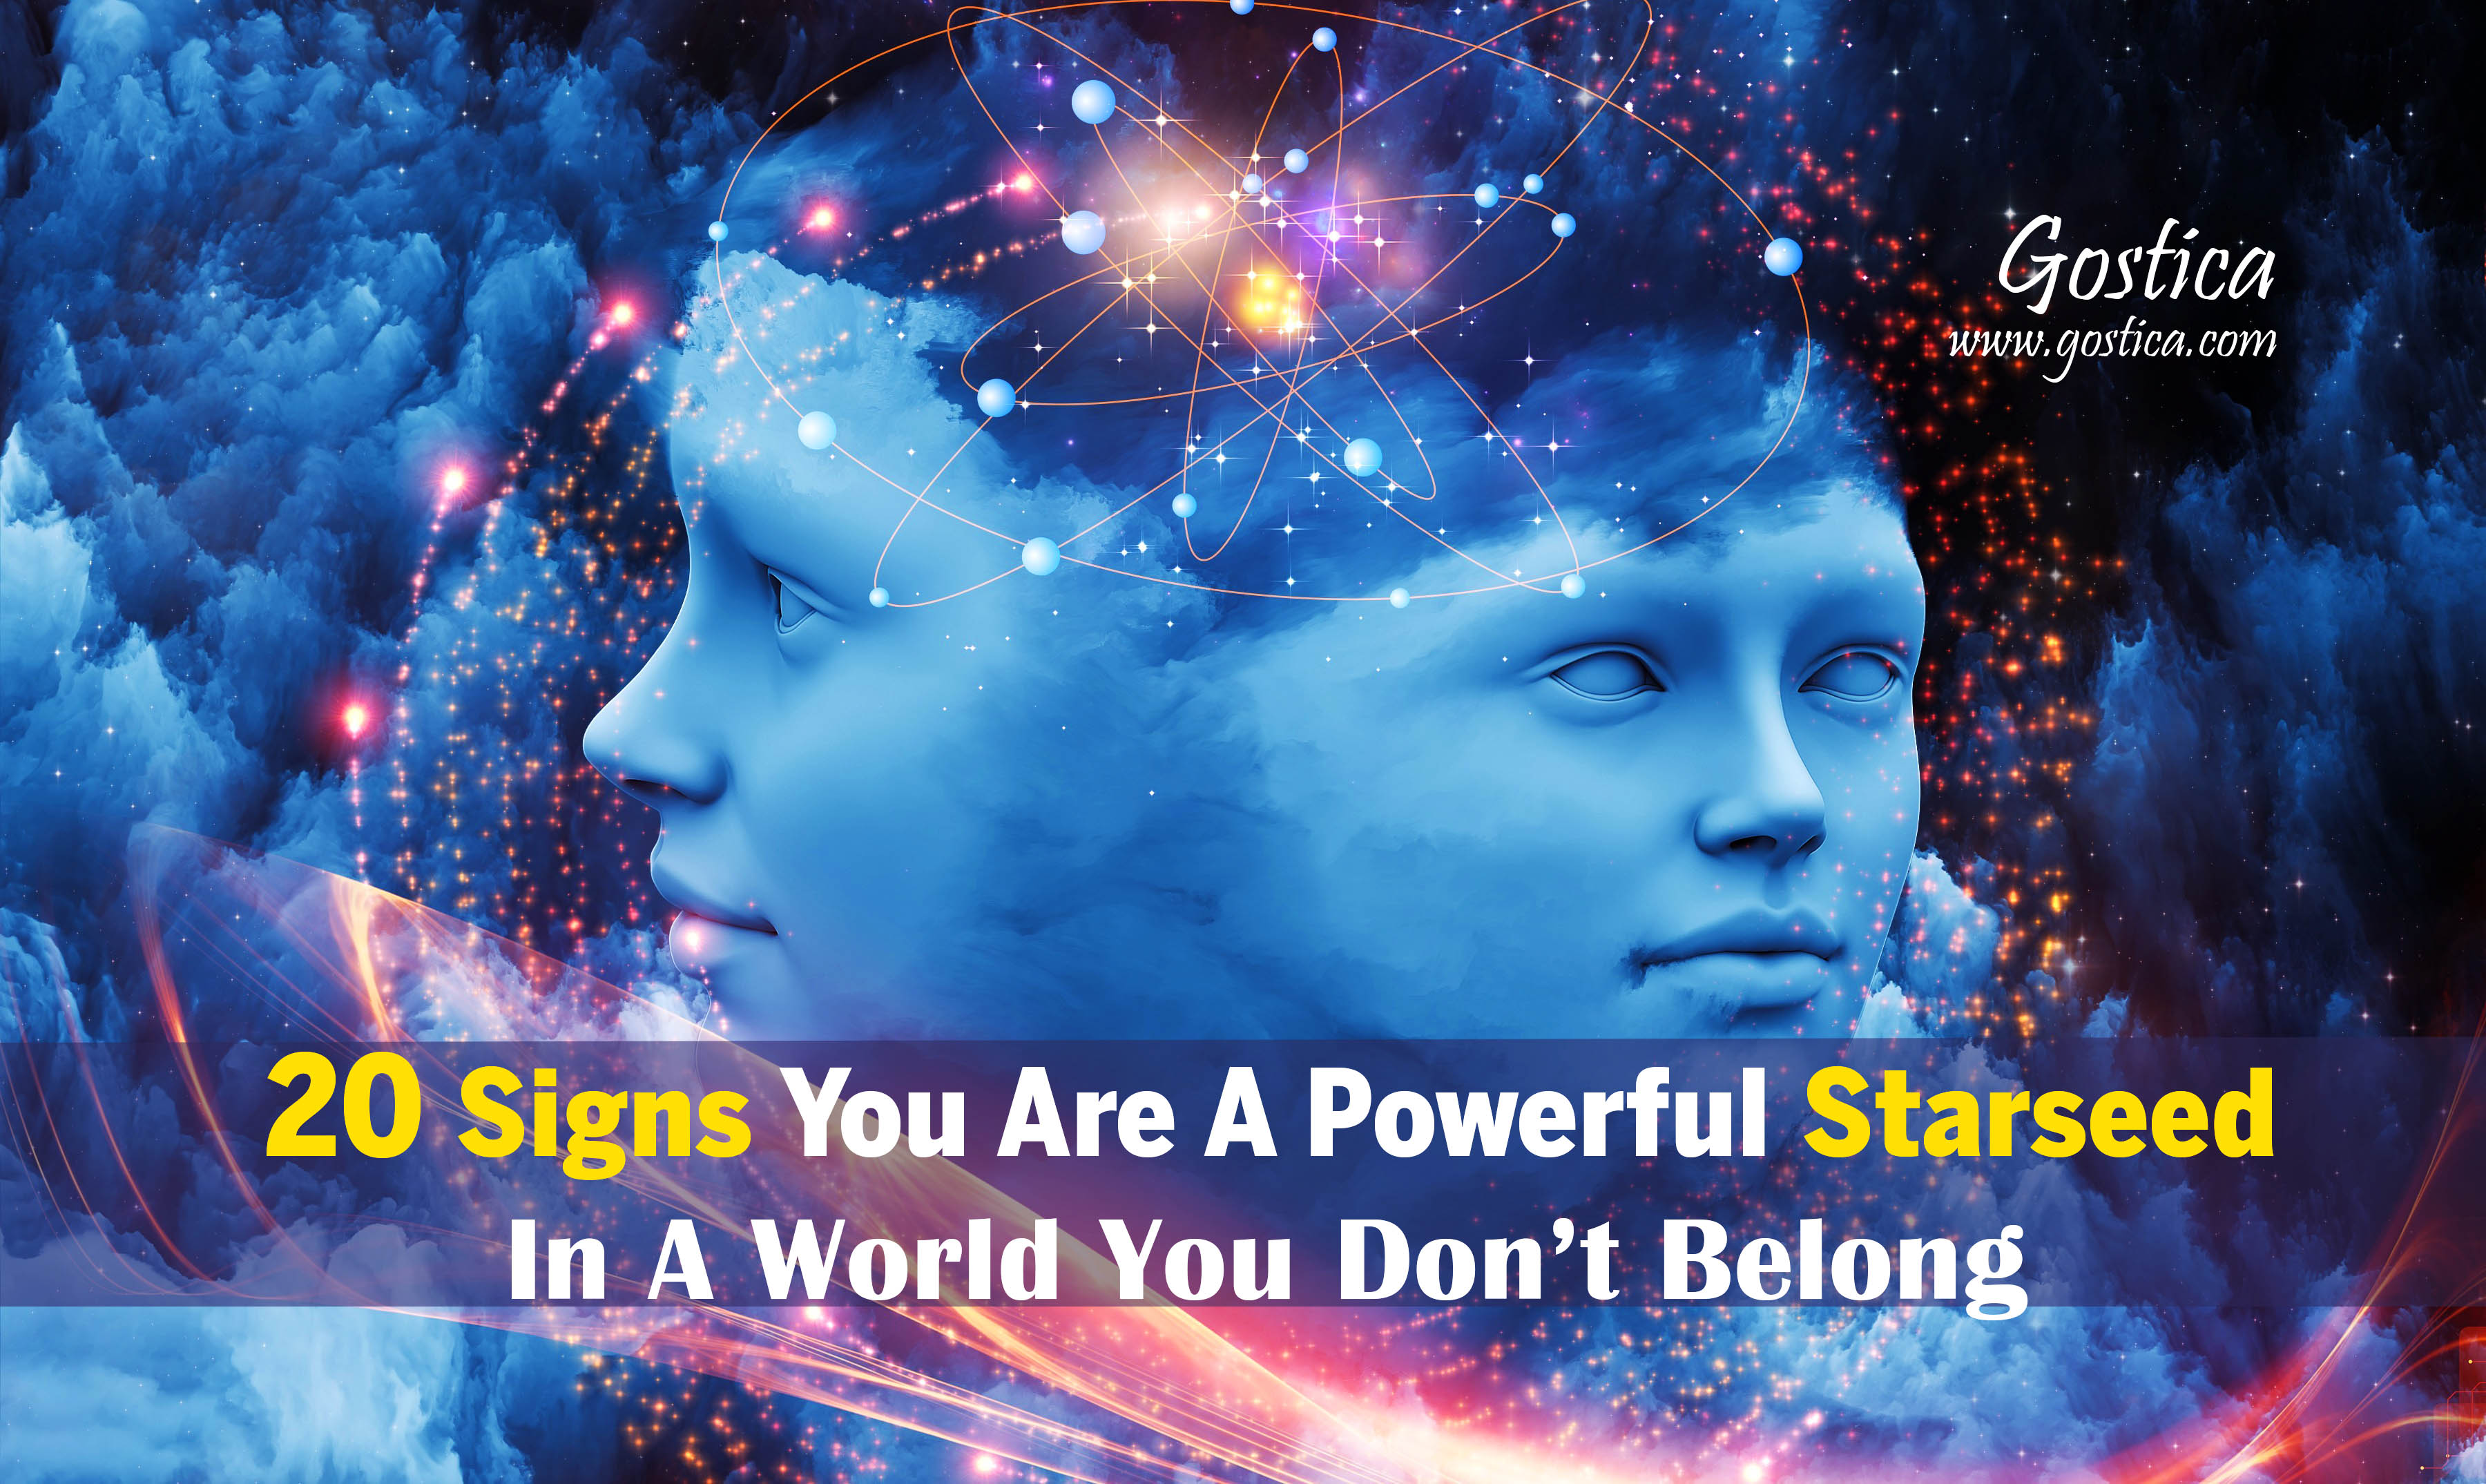 20-Signs-You-Are-A-Powerful-Starseed-In-A-World-You-Don’t-Belong-.jpg